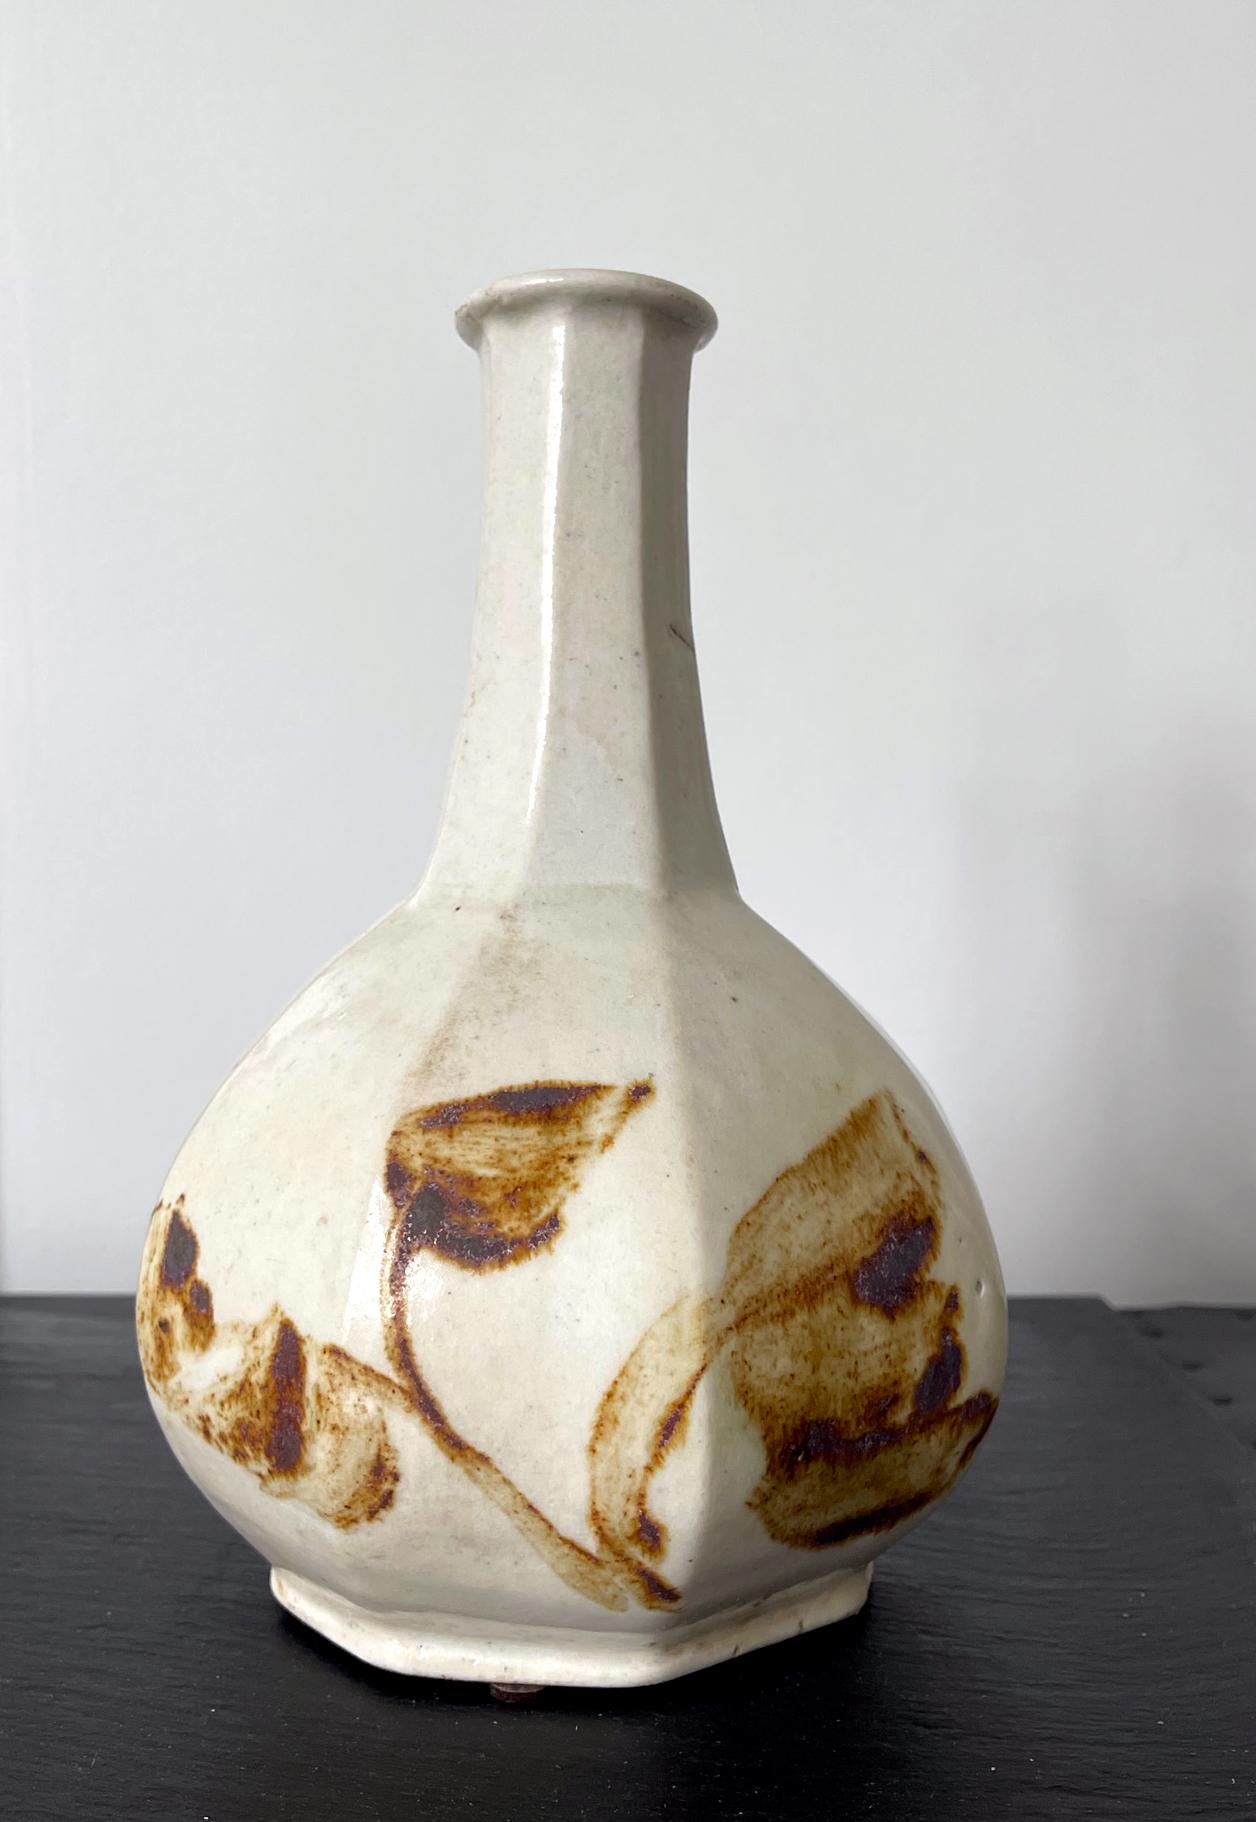 A Korean ceramic bottle with octagonal faceted form with underglaze copper red decoration. The robust bottle with the long neck and a relatively thick built was used to hold liquor such as wine and it was from Joseon dynasty, likely late period